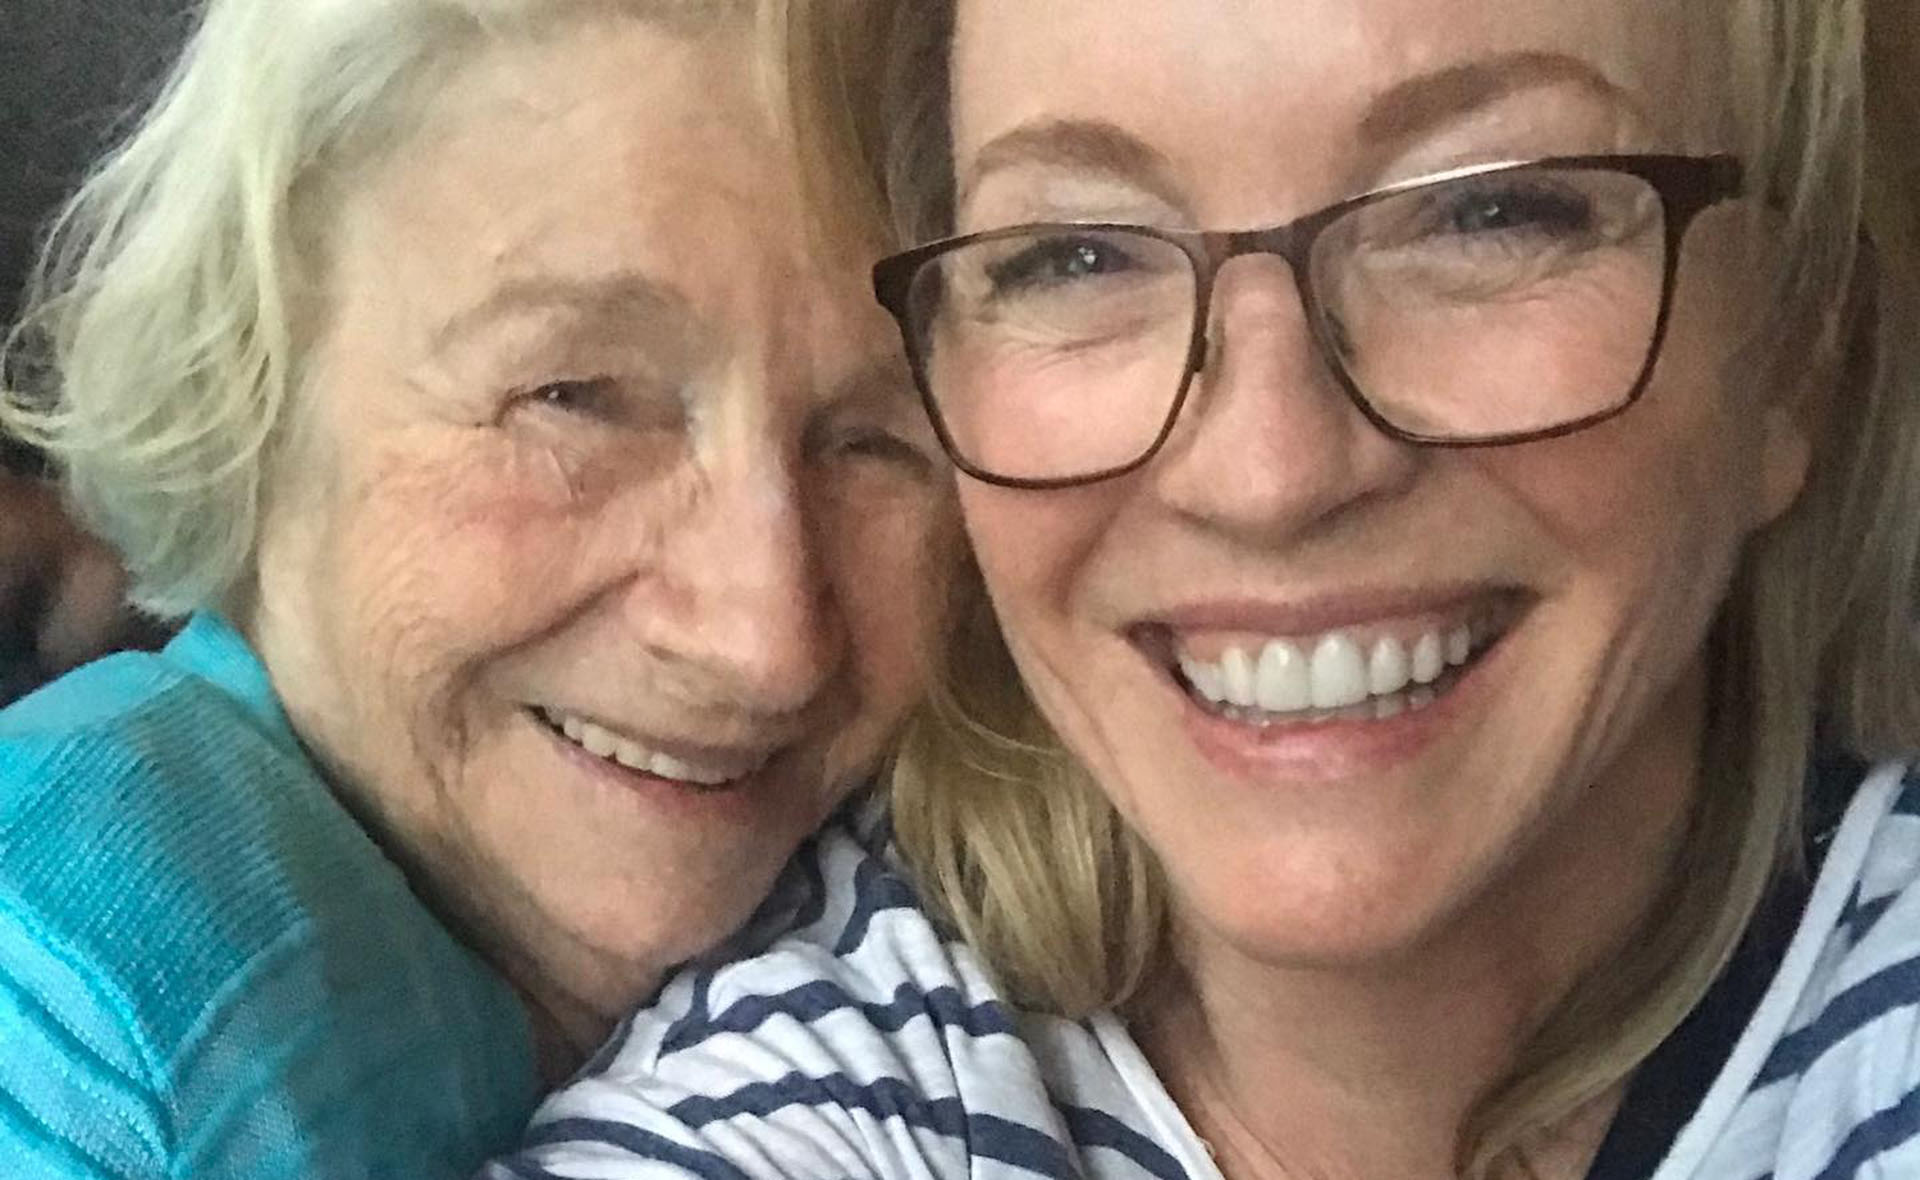 Rebecca Gibney’s worrying news as her mother is hospitalised again: “She’s a fighter”